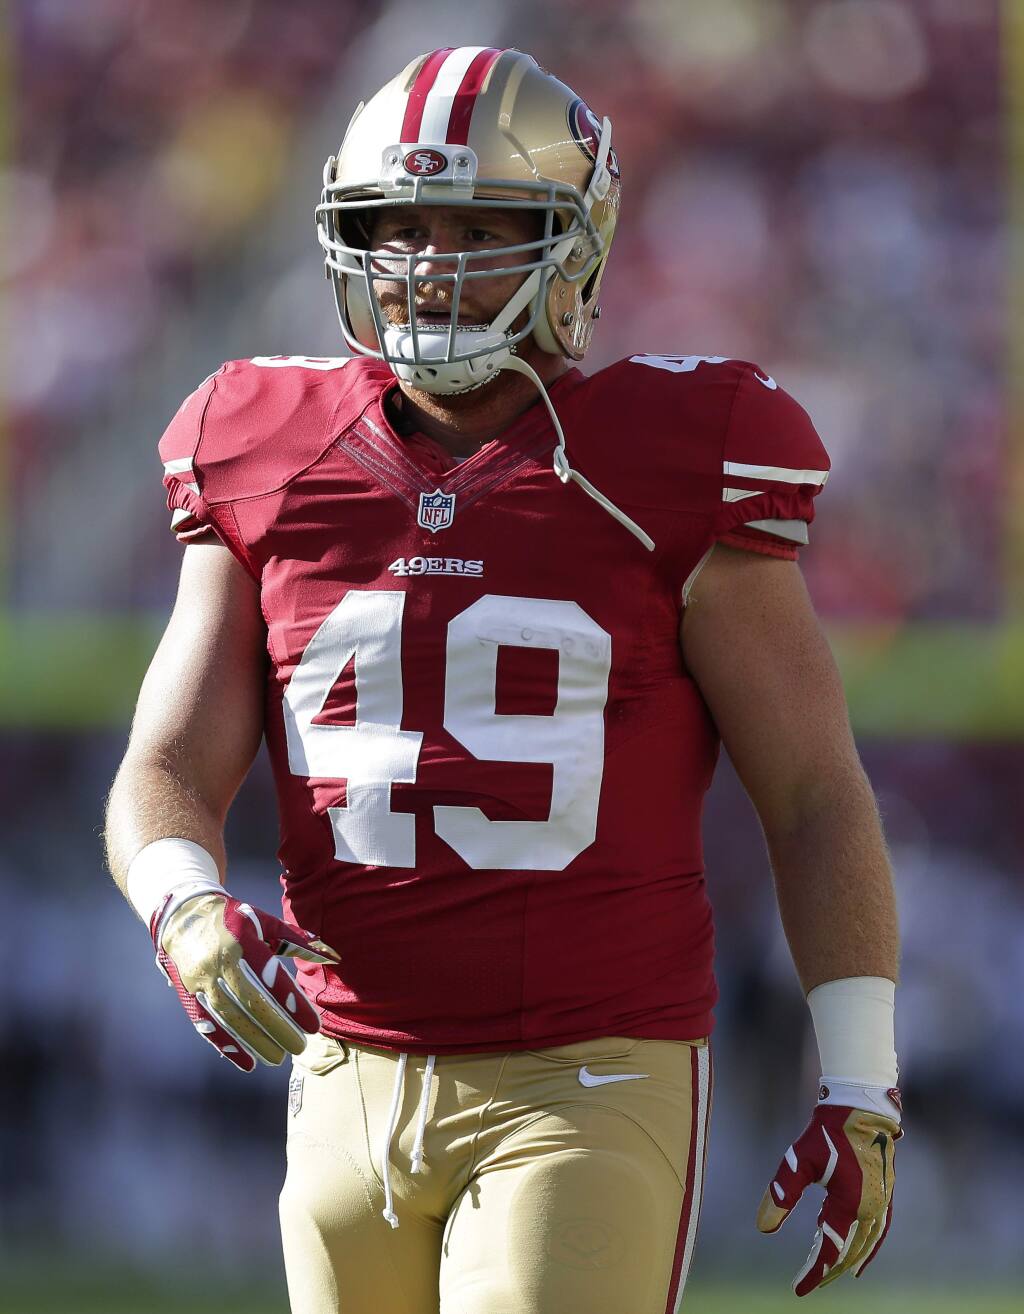 San Francisco 49ers fullback Bruce Miller (49) warms up before an NFL football game against the Chicago Bears in Santa Clara, Sunday, Sept. 14, 2014. (AP Photo/Marcio Jose Sanchez)